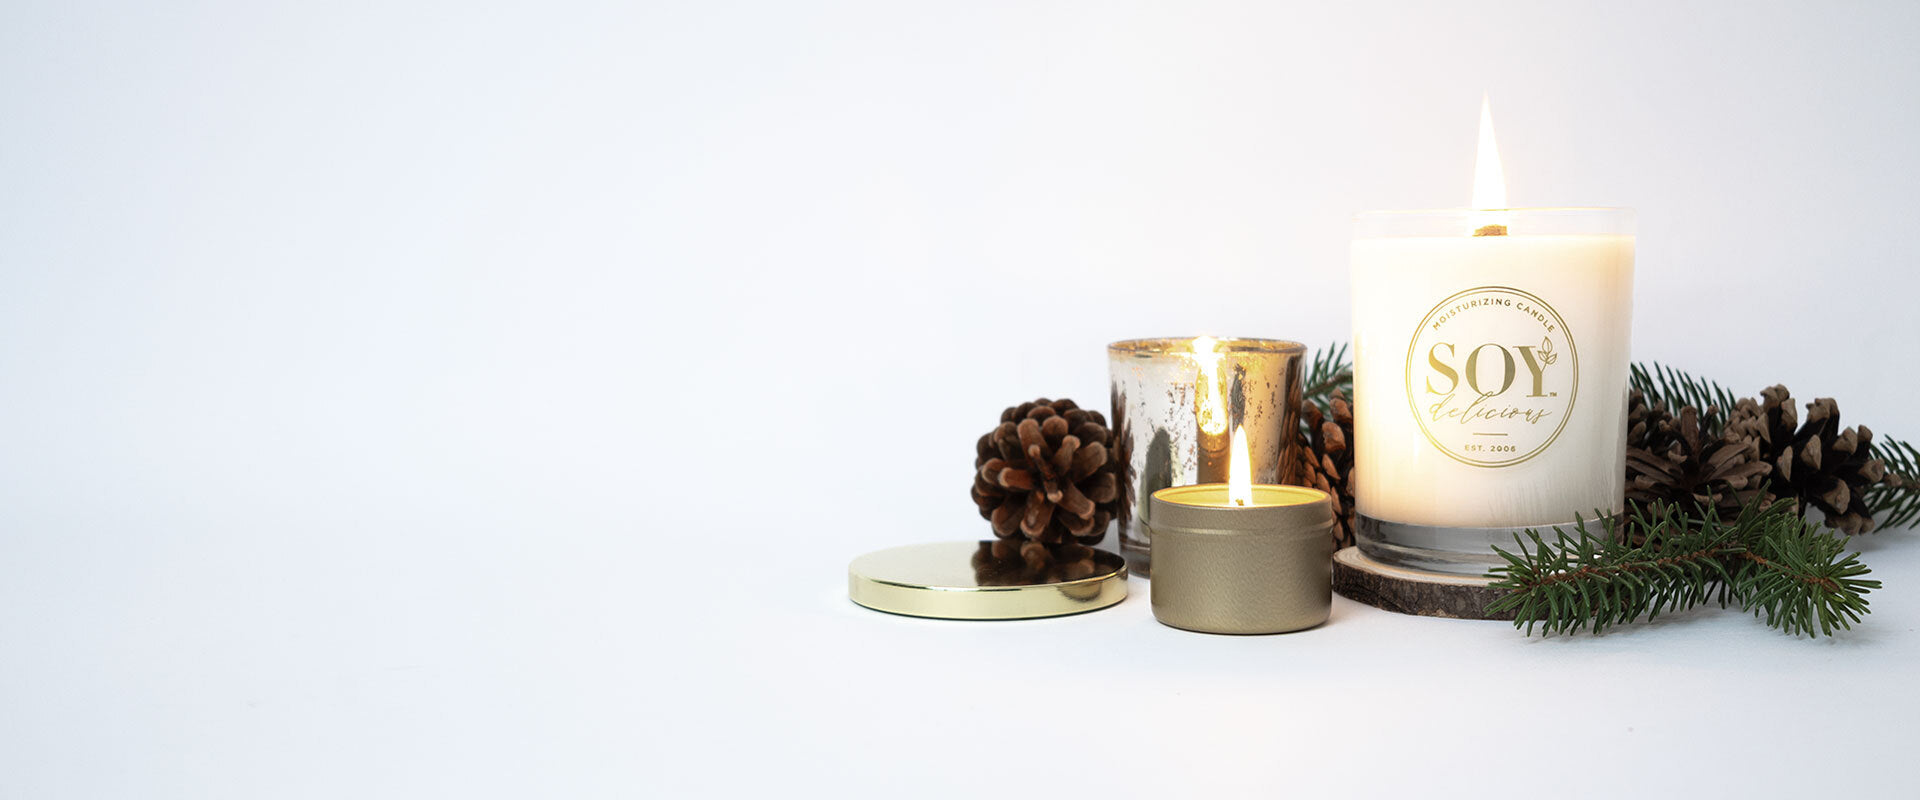 Celebrating Small Business Saturday with Soy Delicious Candles